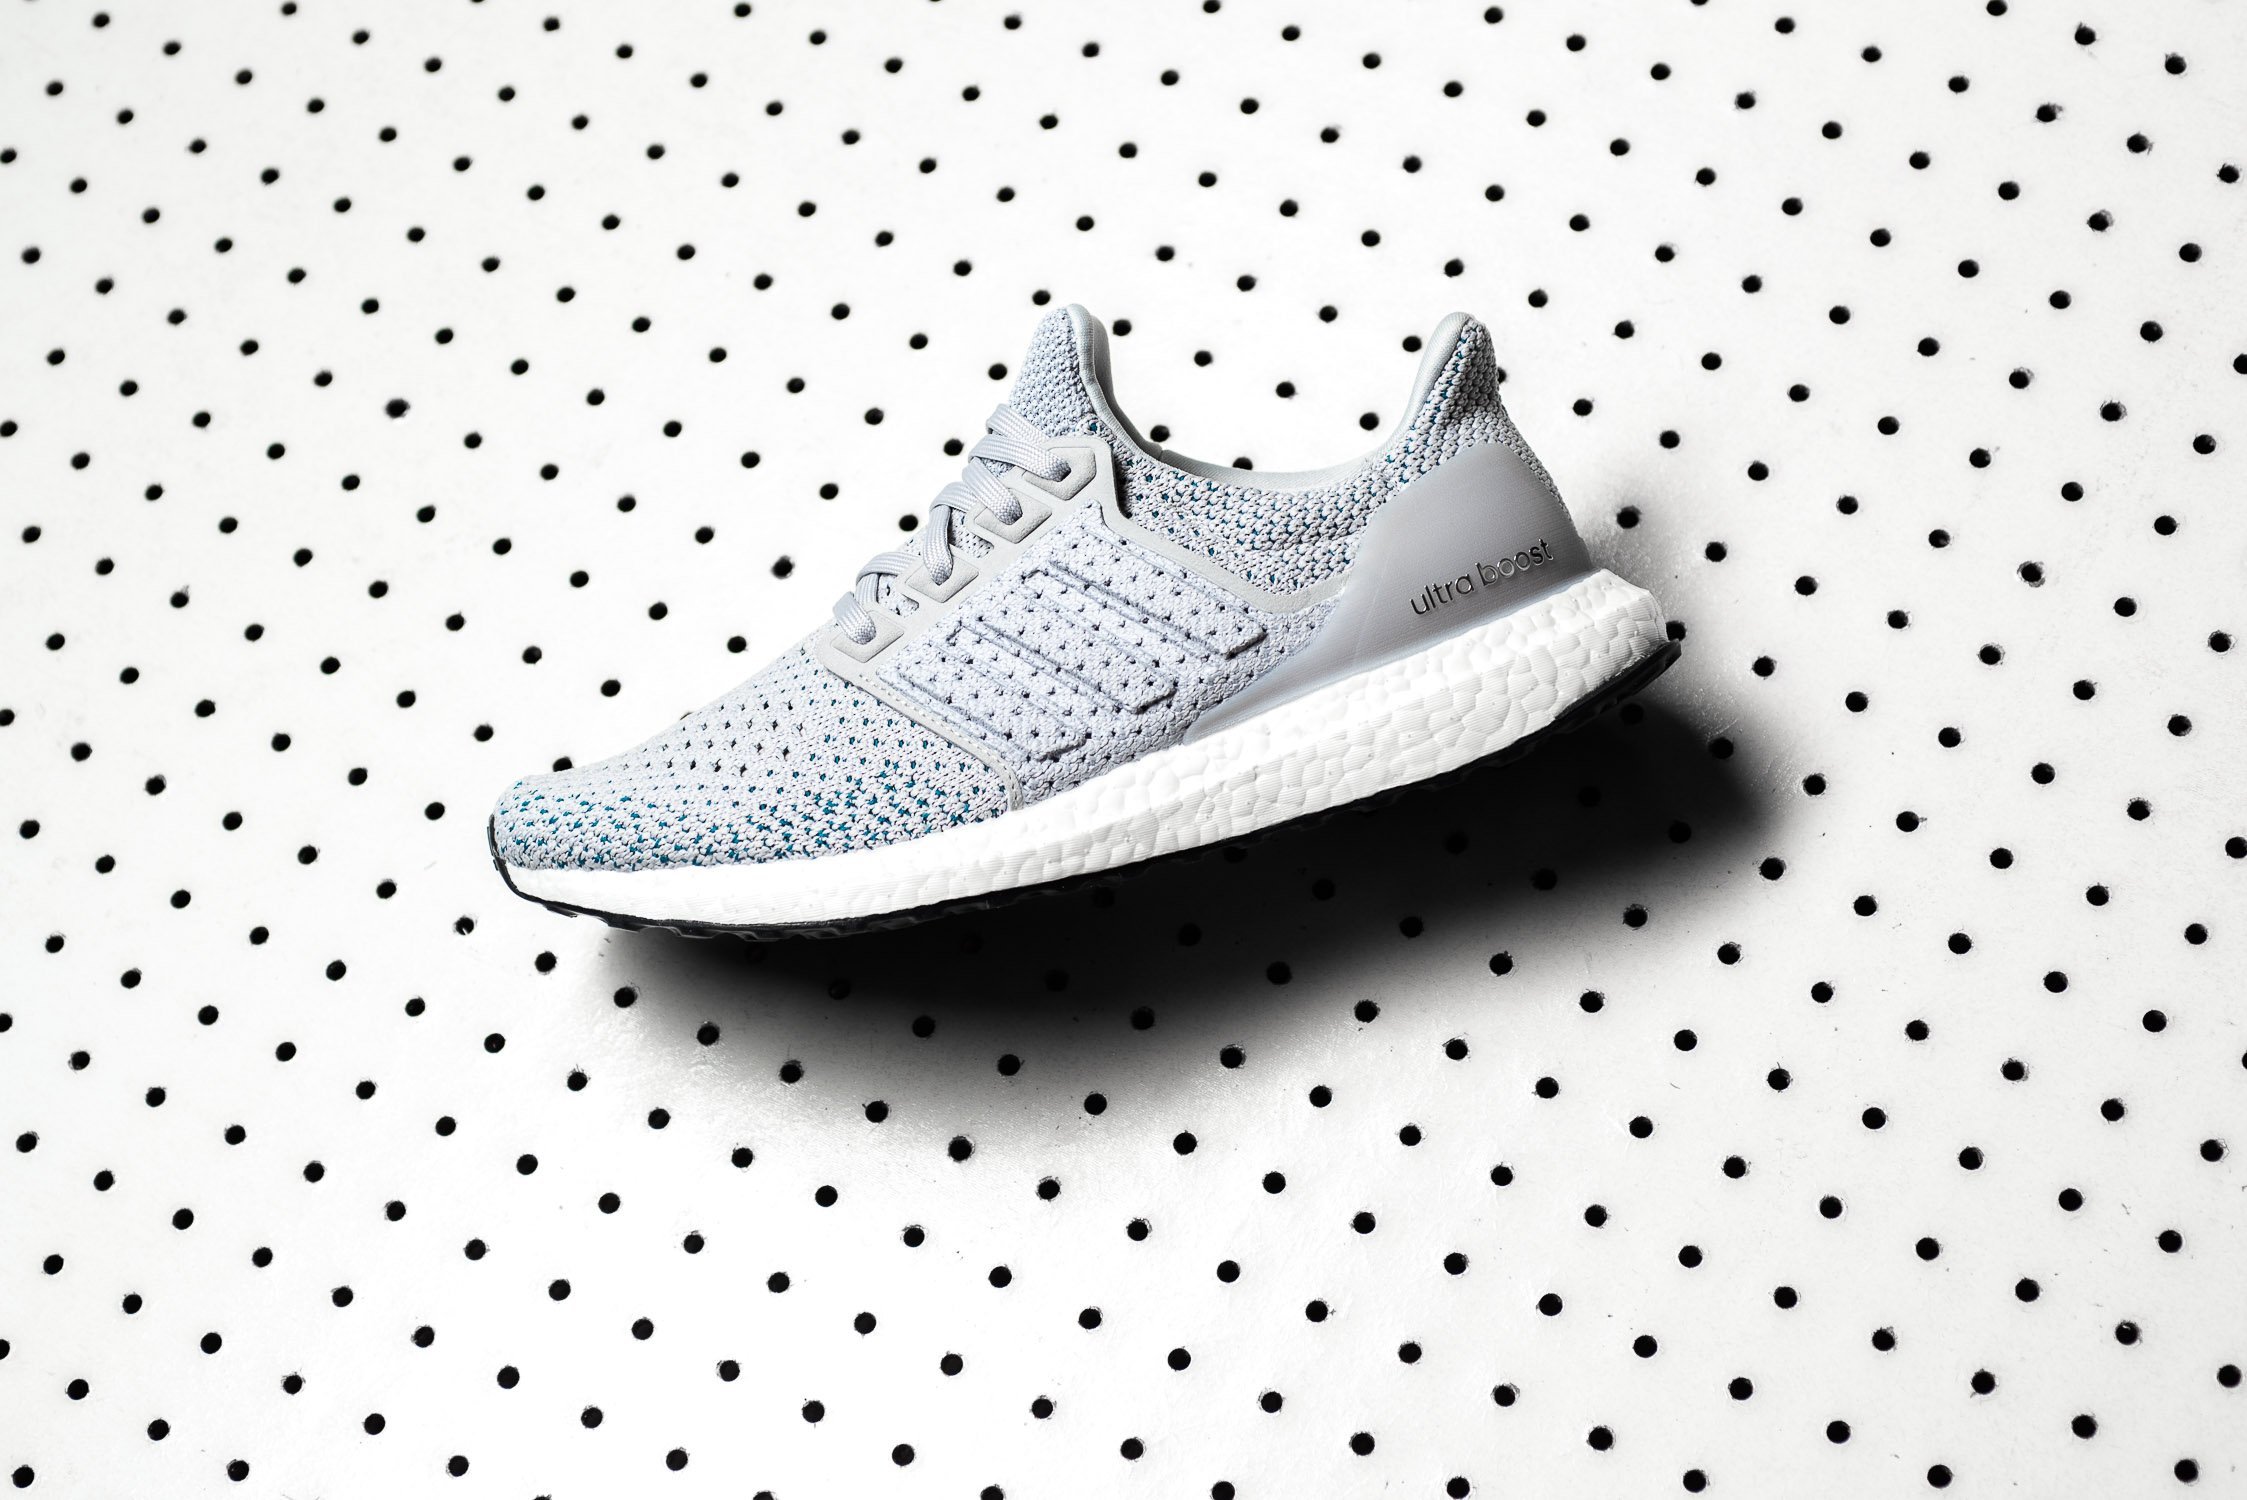 Add coolness to the hot season with the adidas UltraBOOST Clima “Gray”